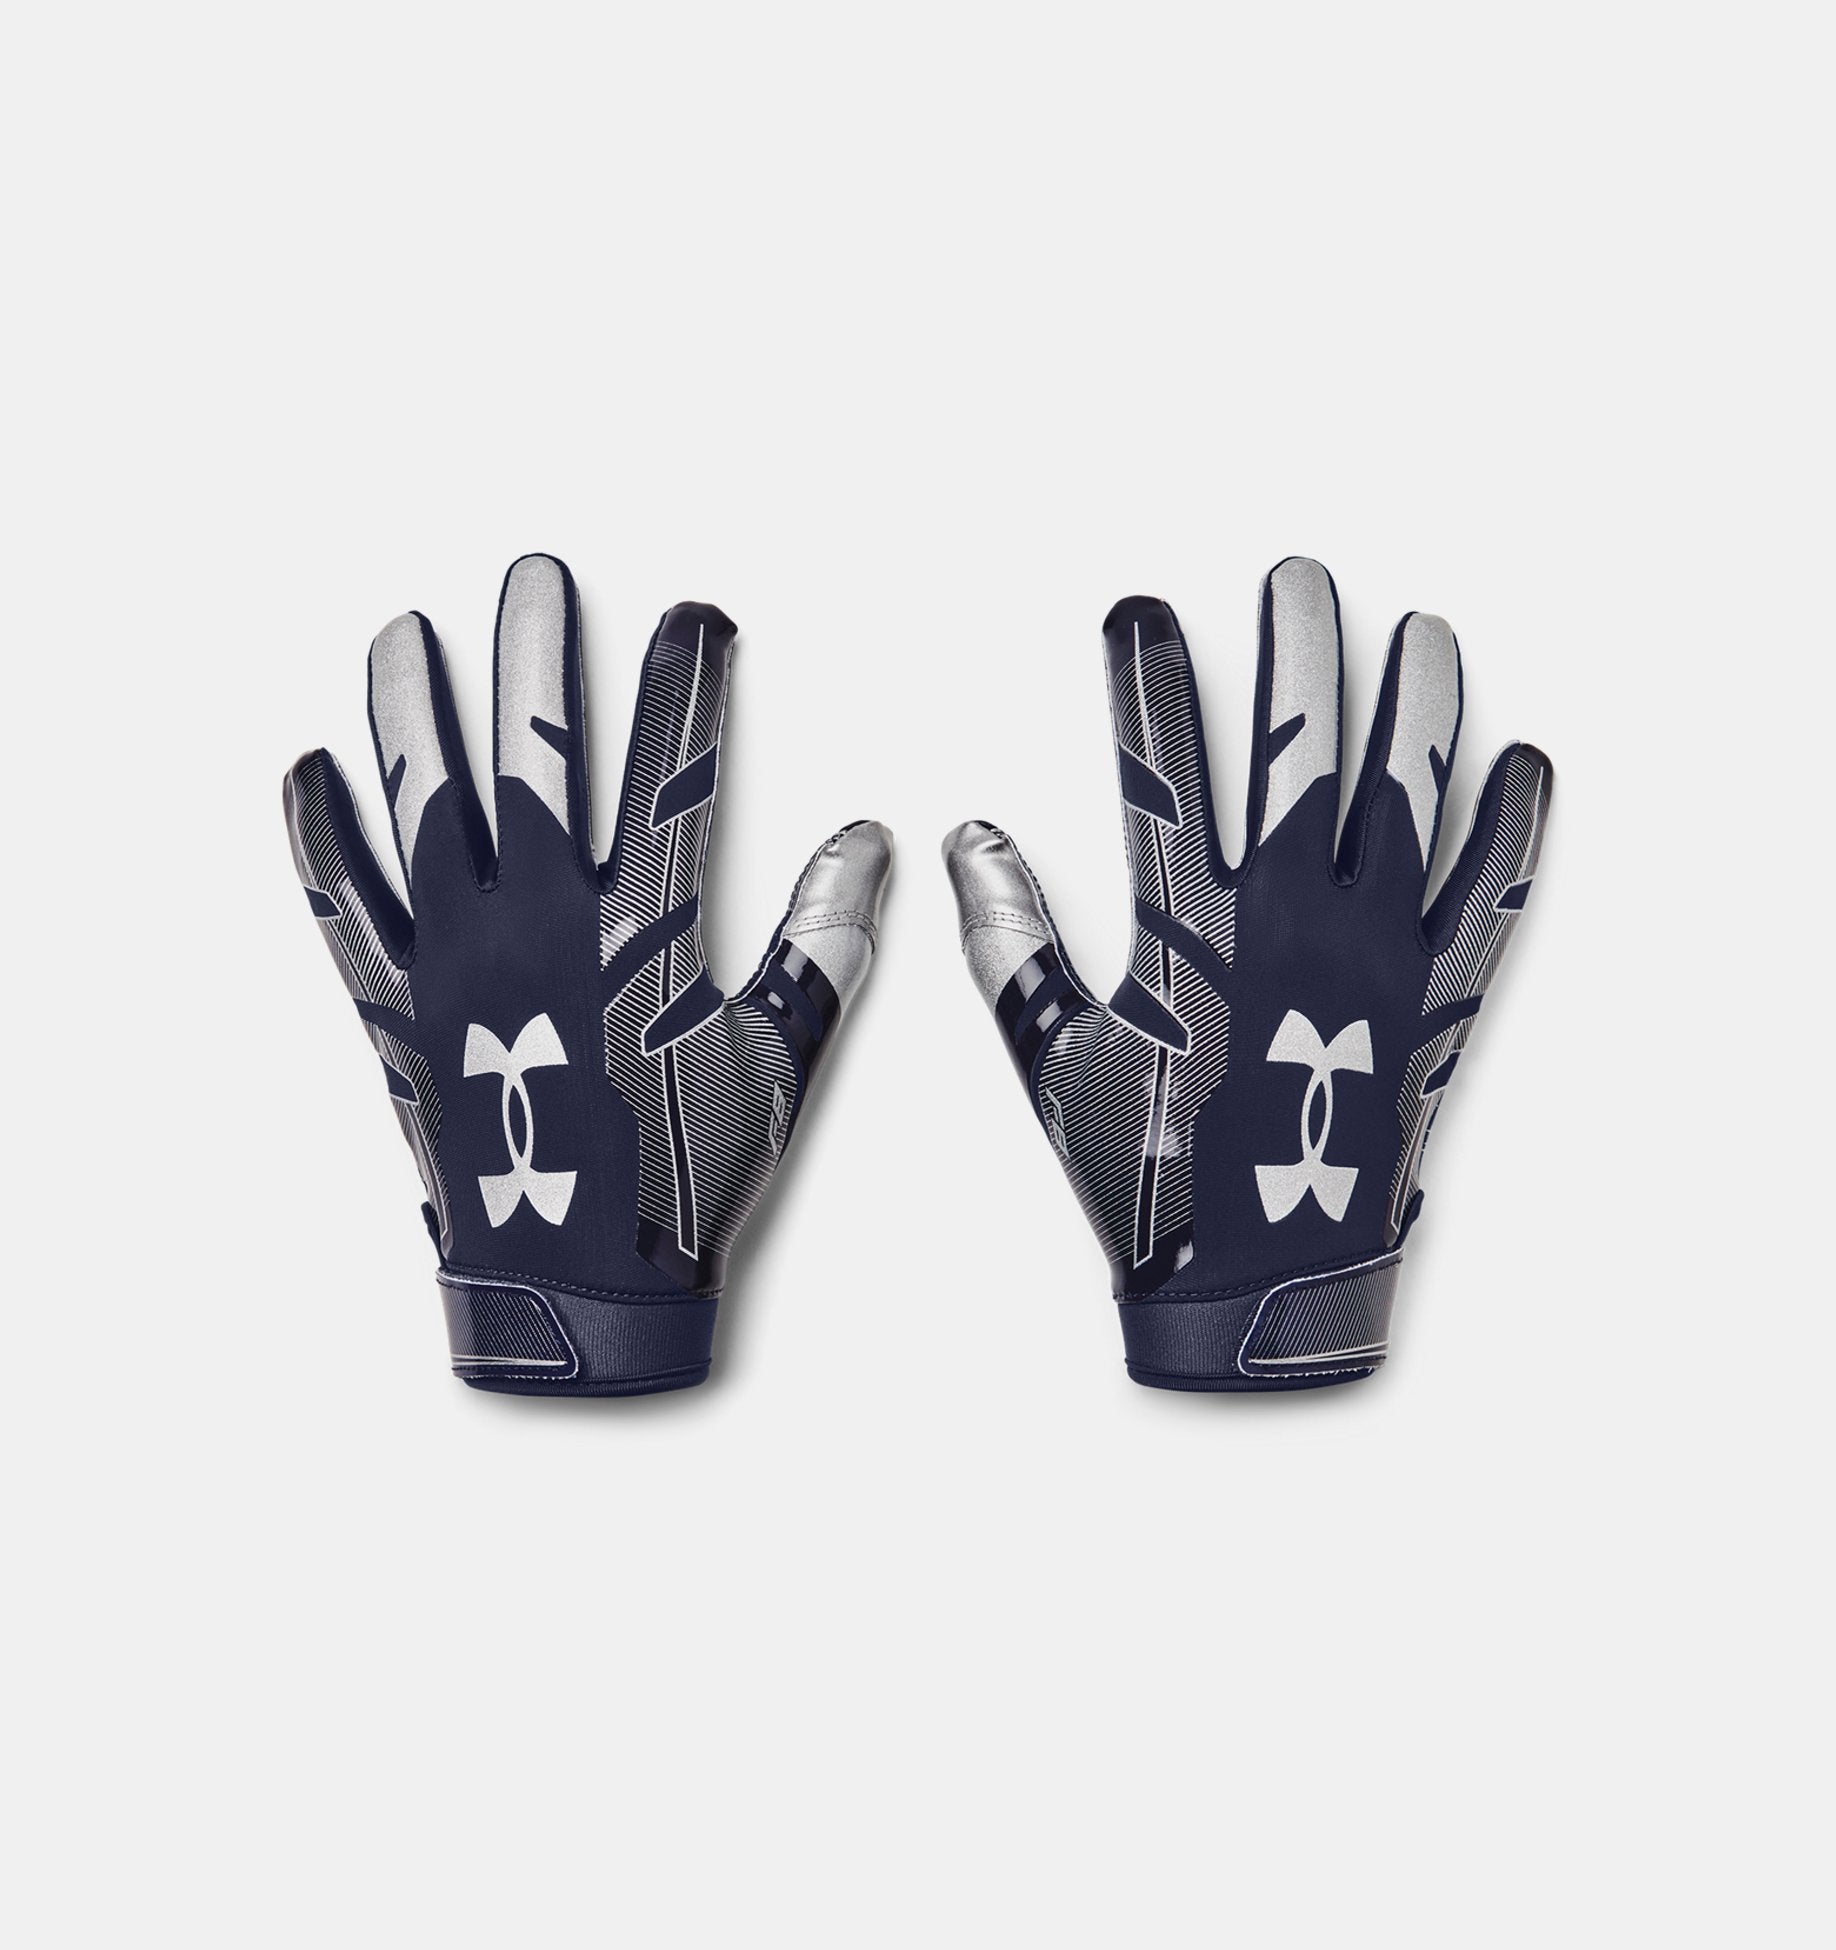 Under Armour Mens F8 Football Gloves Accessories Under Armour Midnight Navy/Metallic Silver-410 Small 